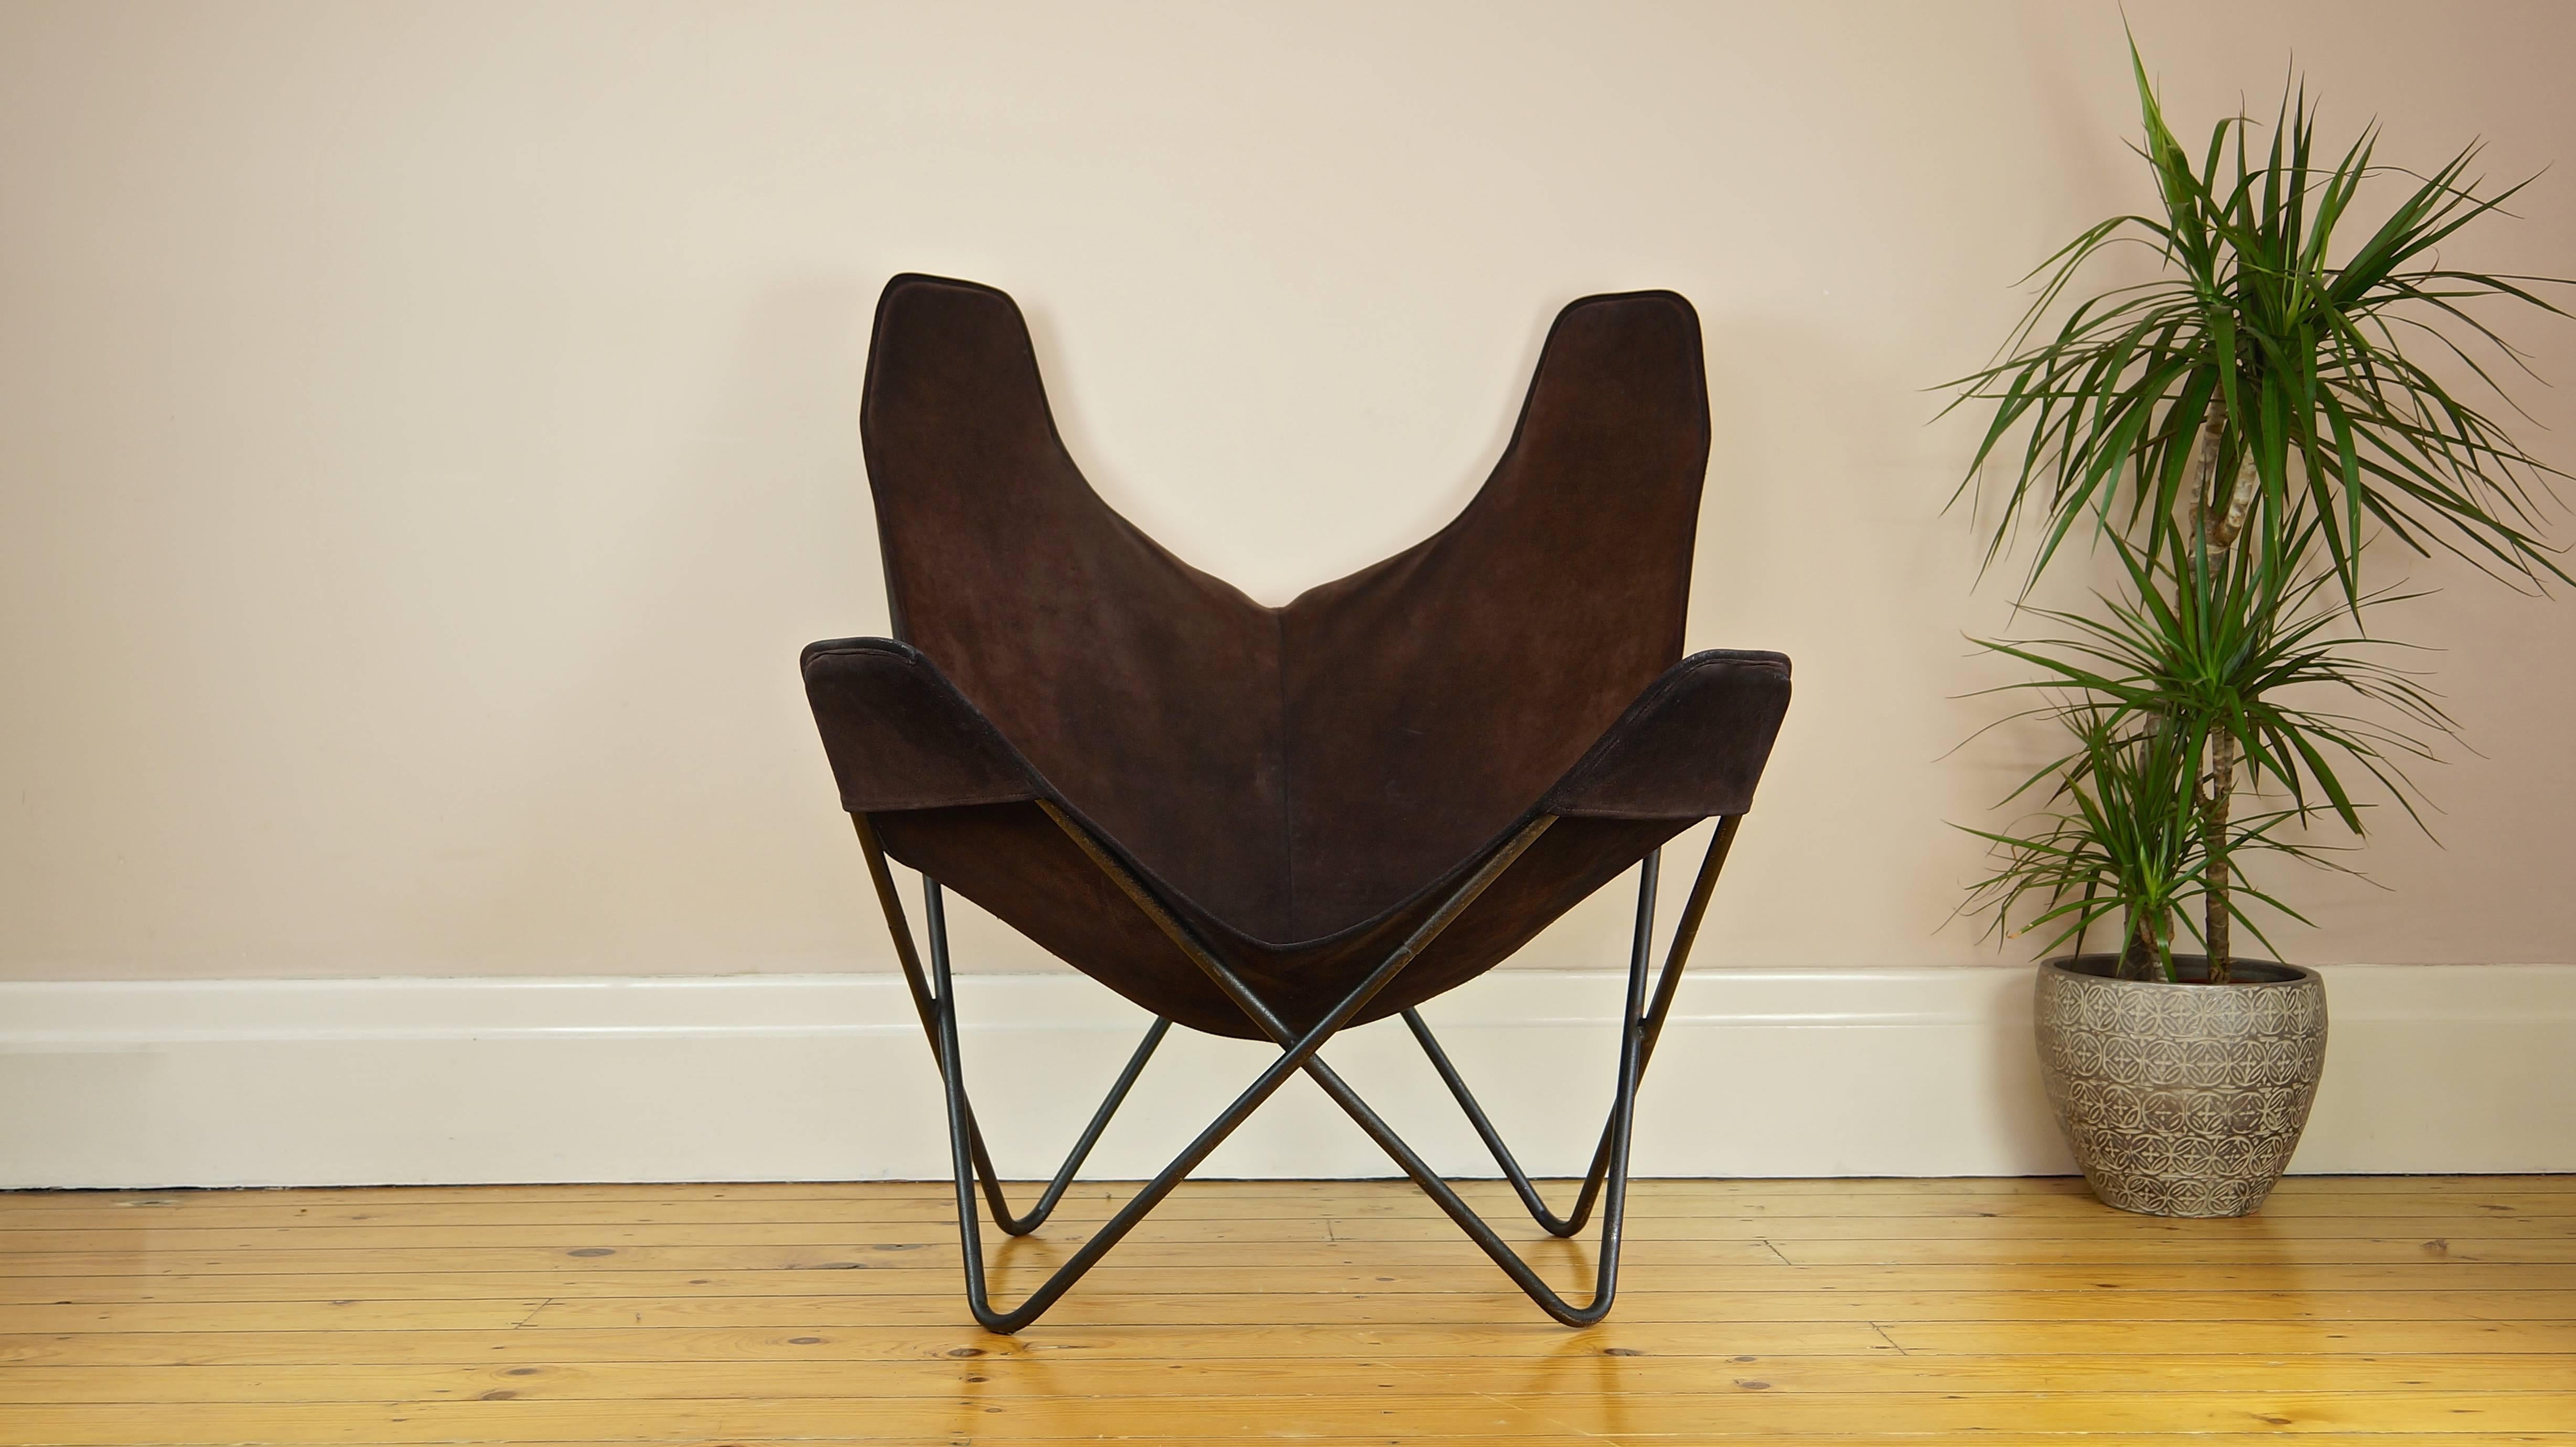 Steel 1970s Knoll Butterfly Chair by Jorge Ferrari-Hardoy, Suede Leather Sling Chair